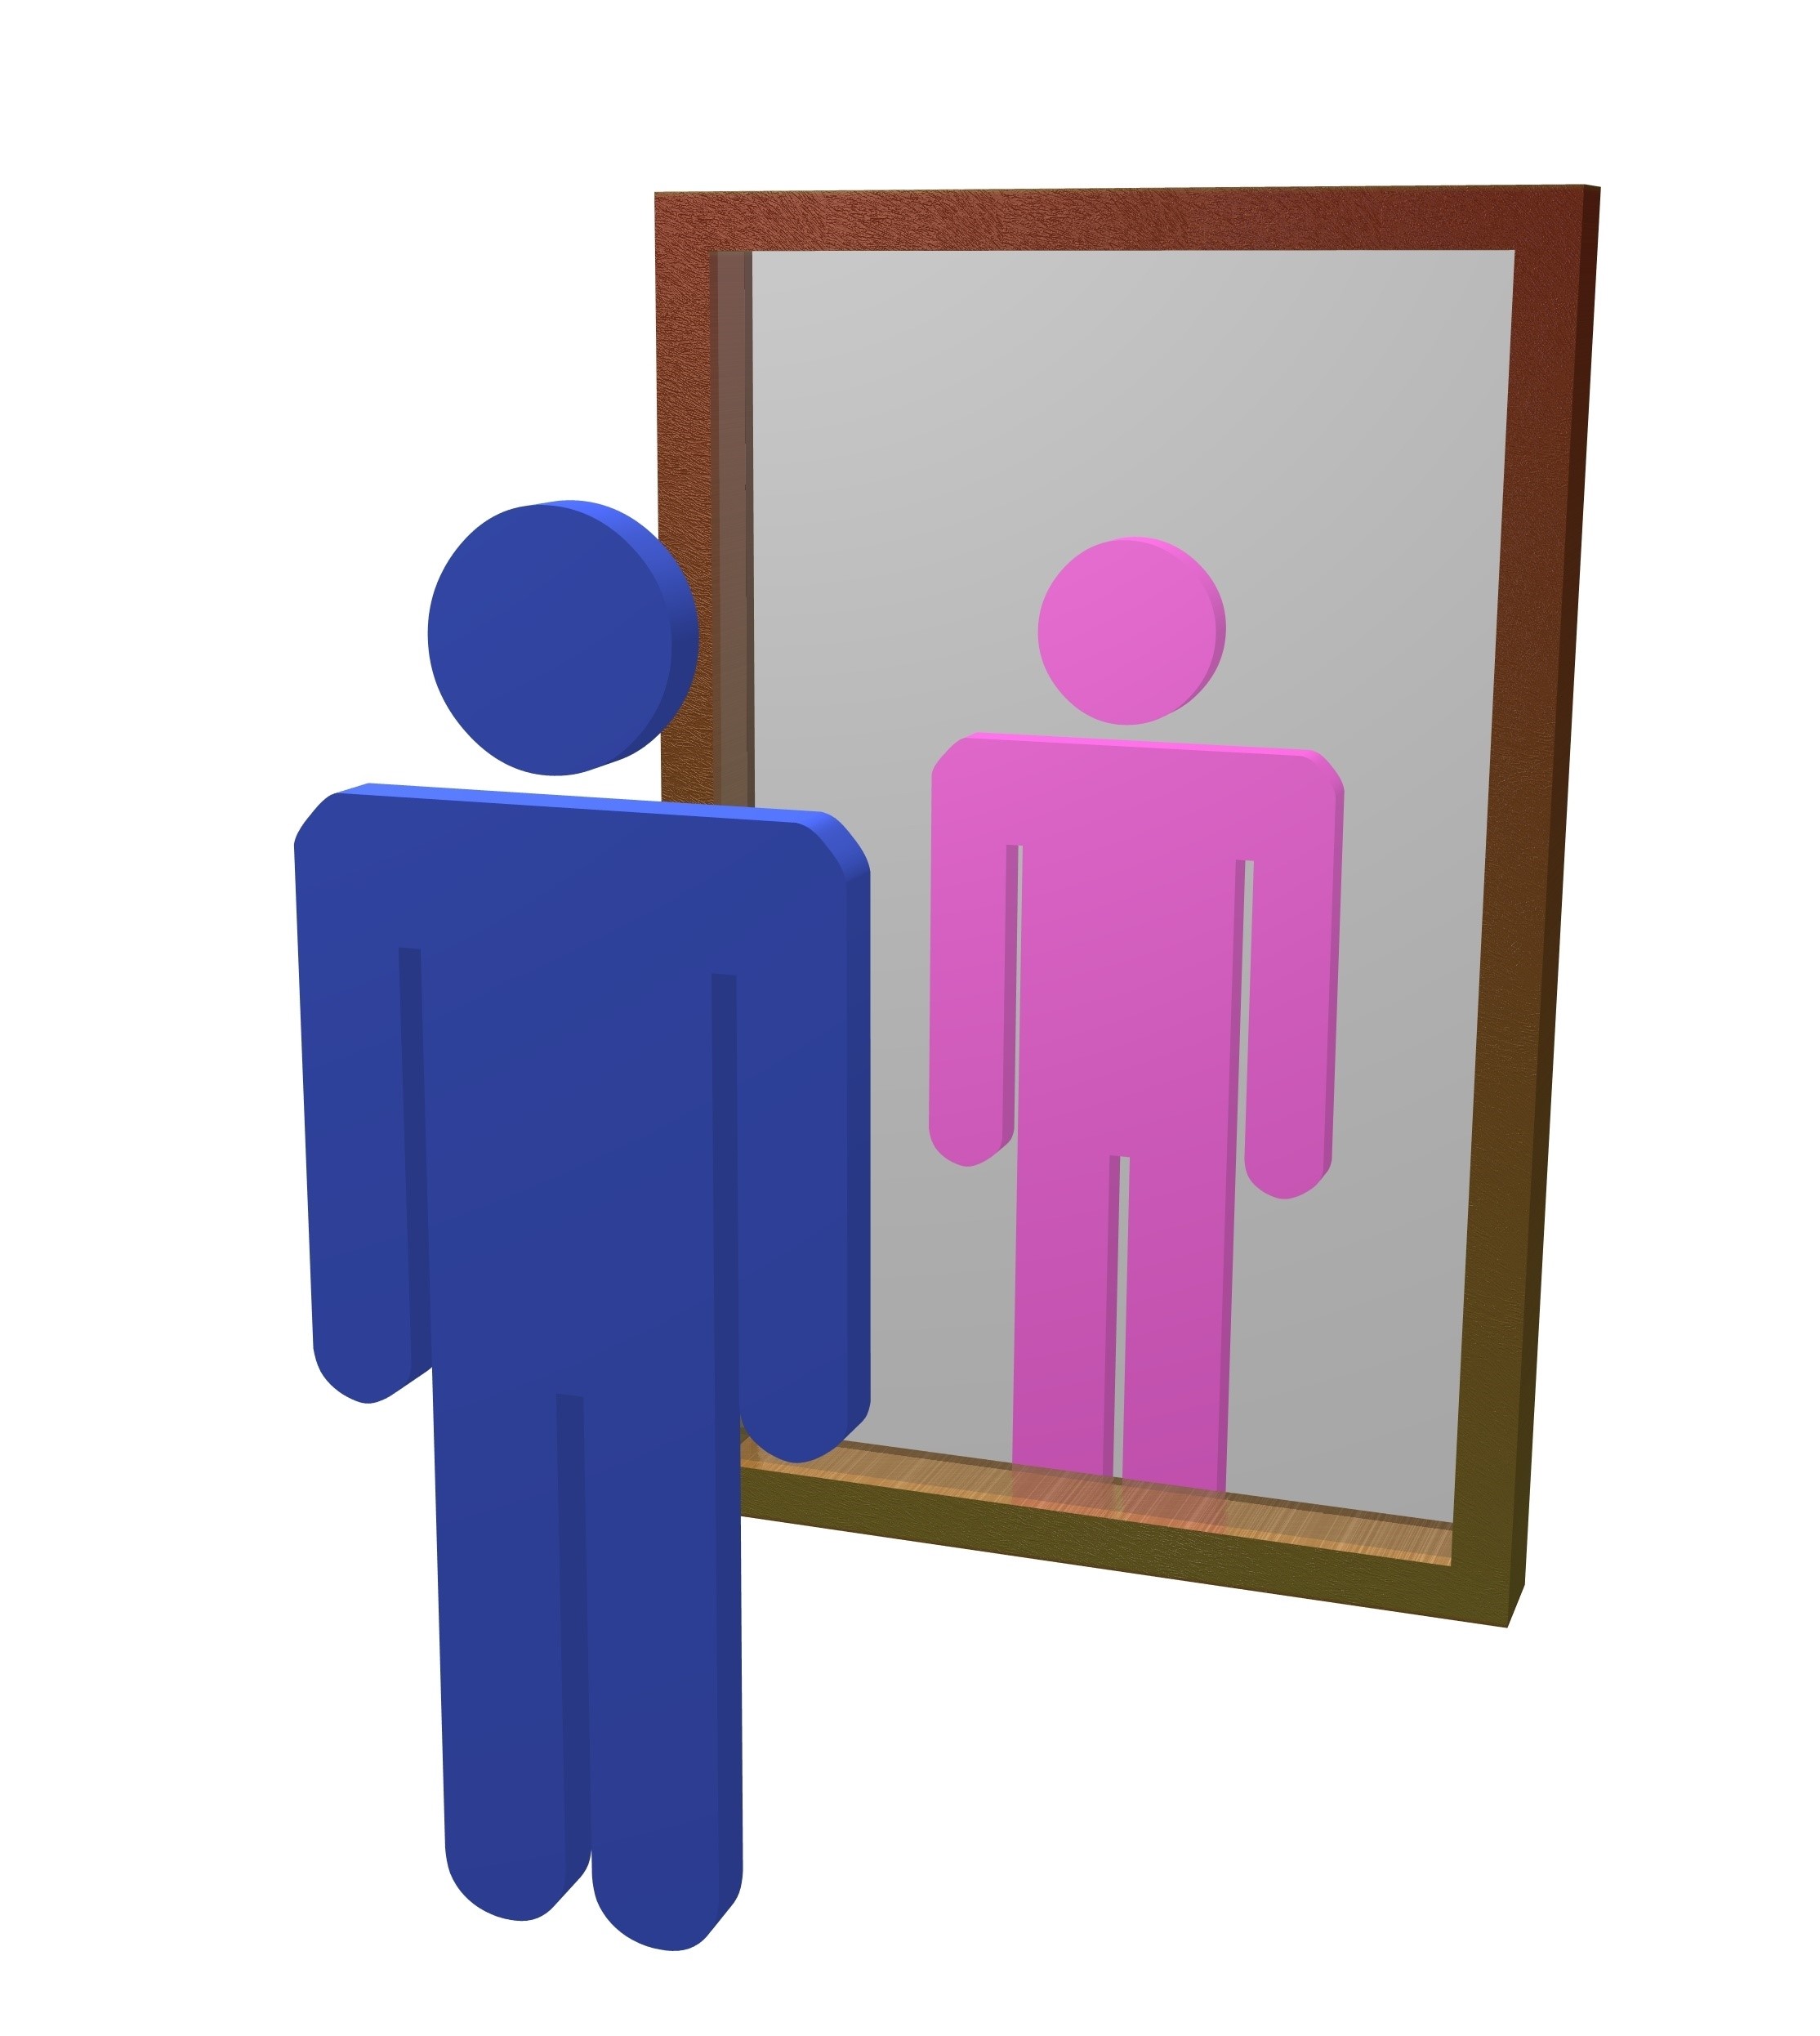 Mirror with gender reflection